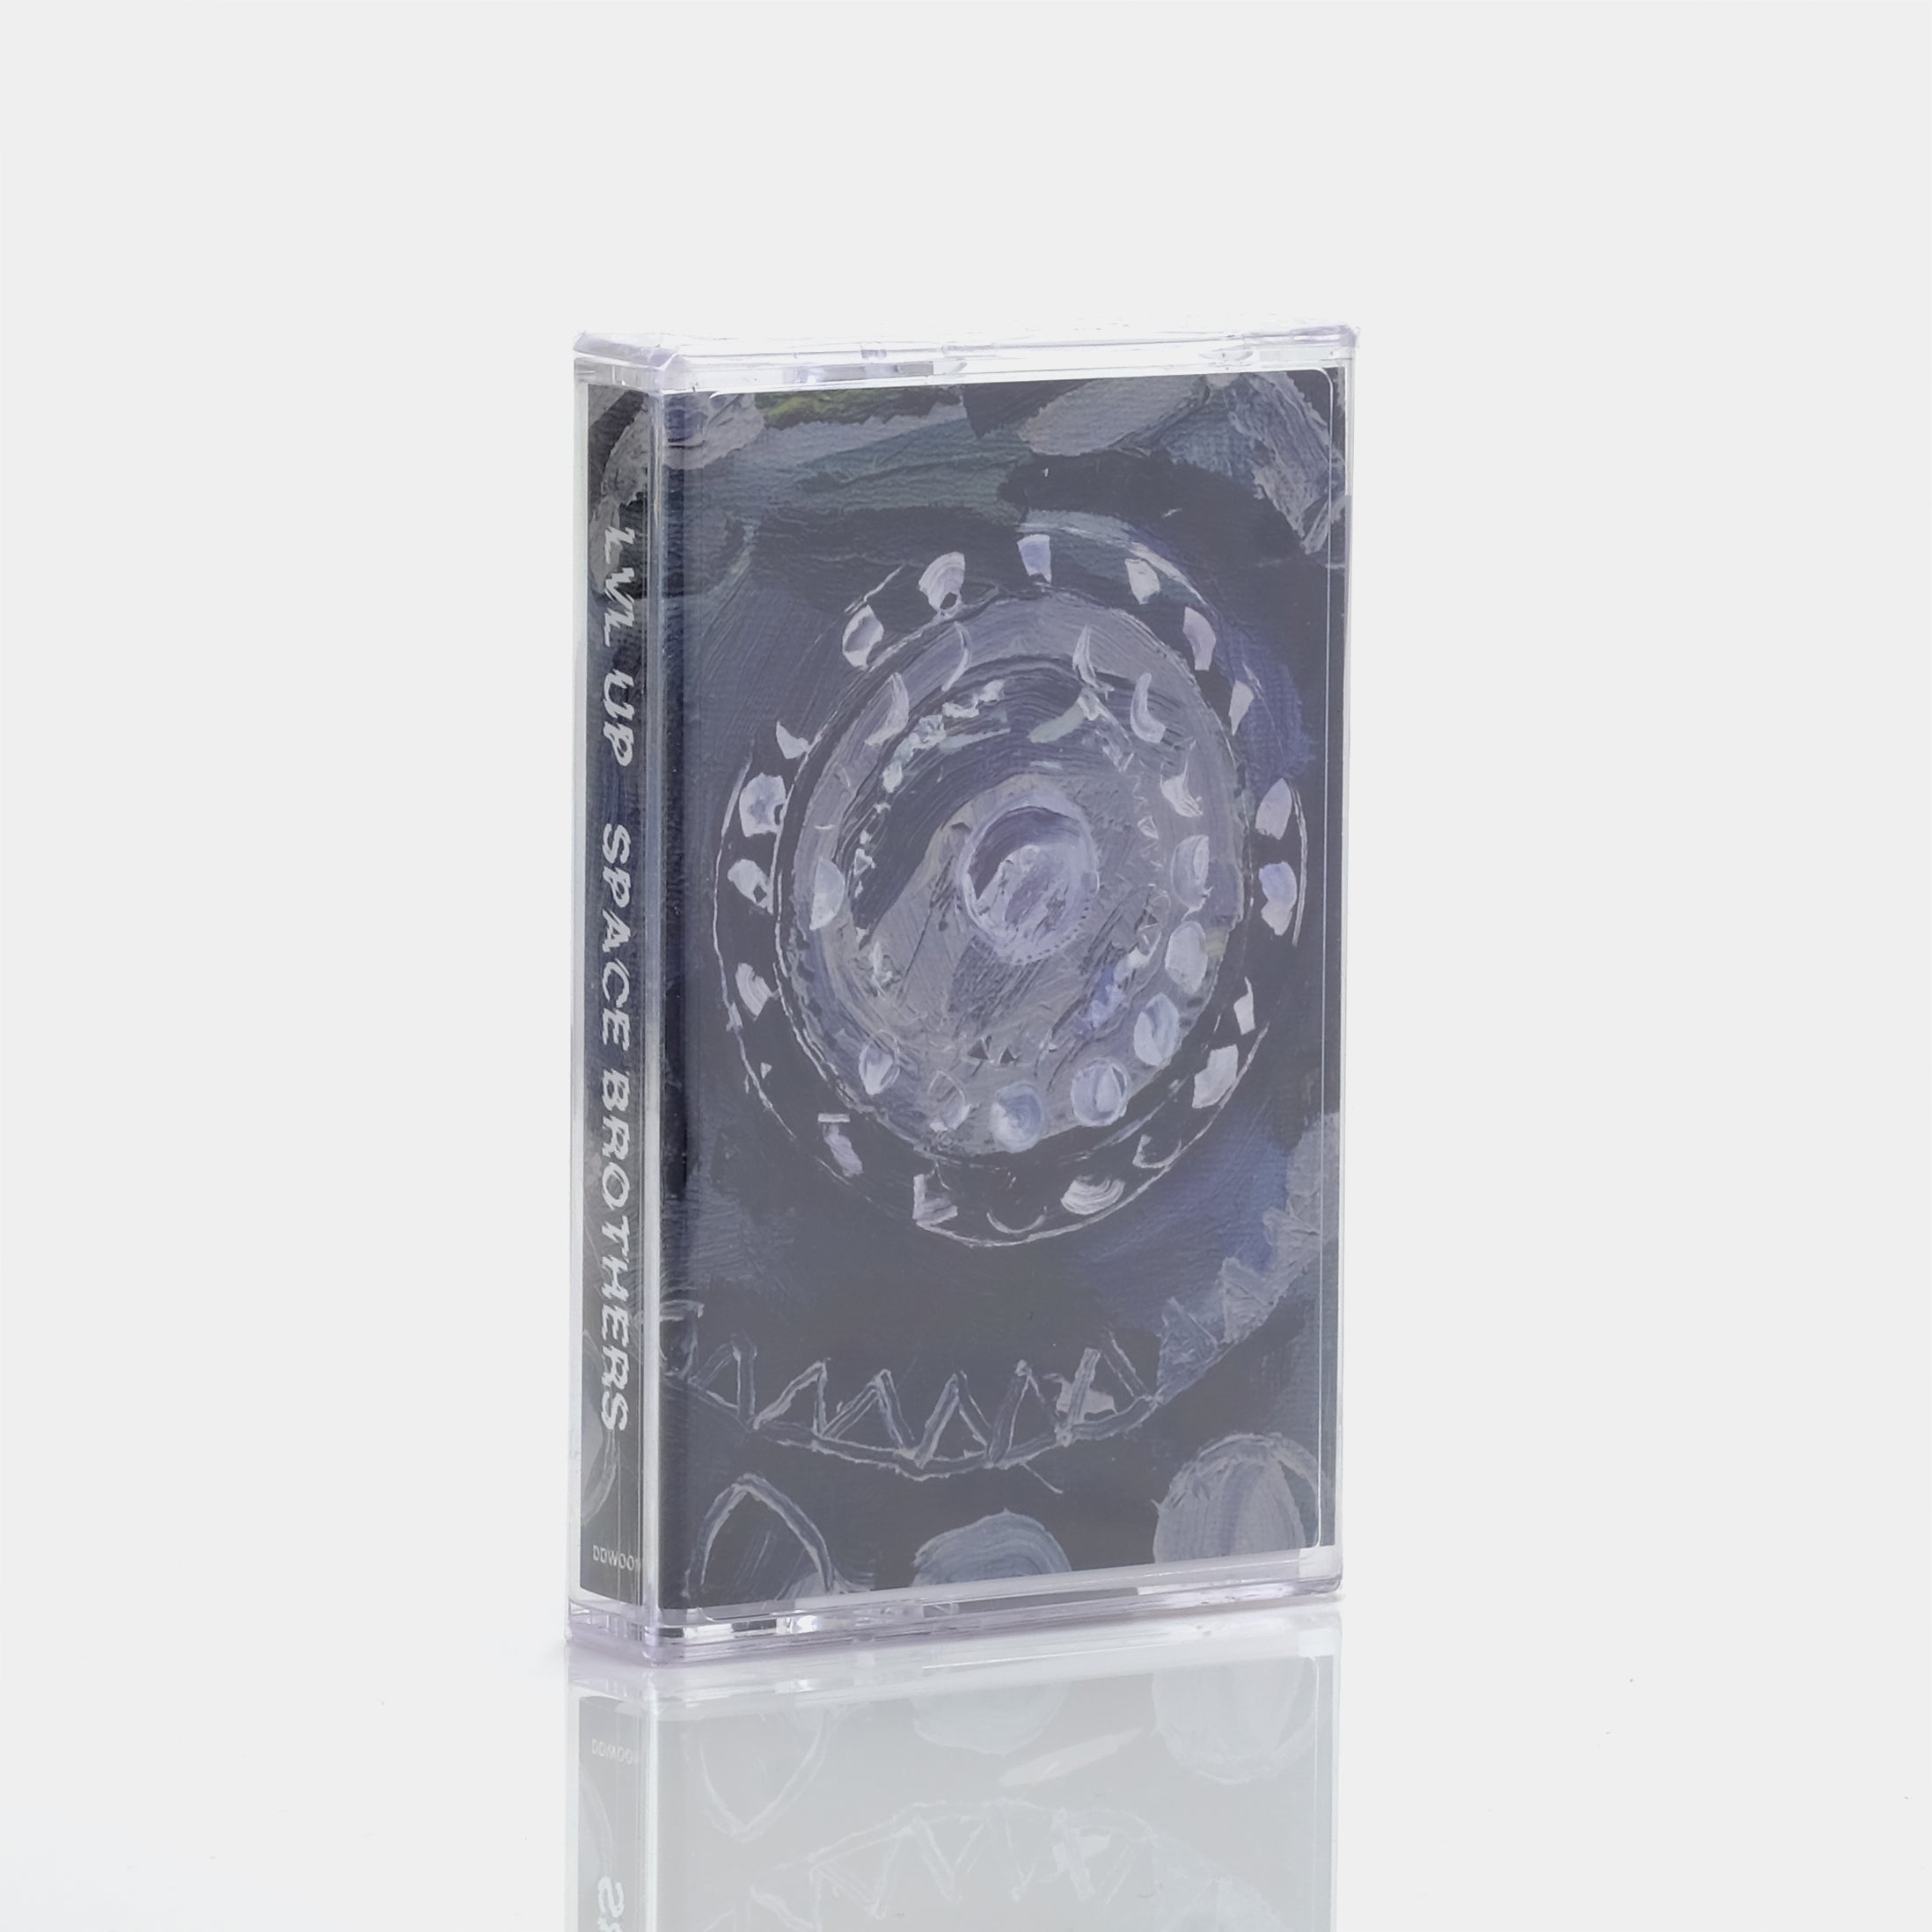 LVL UP - Space Brothers Cassette Tape